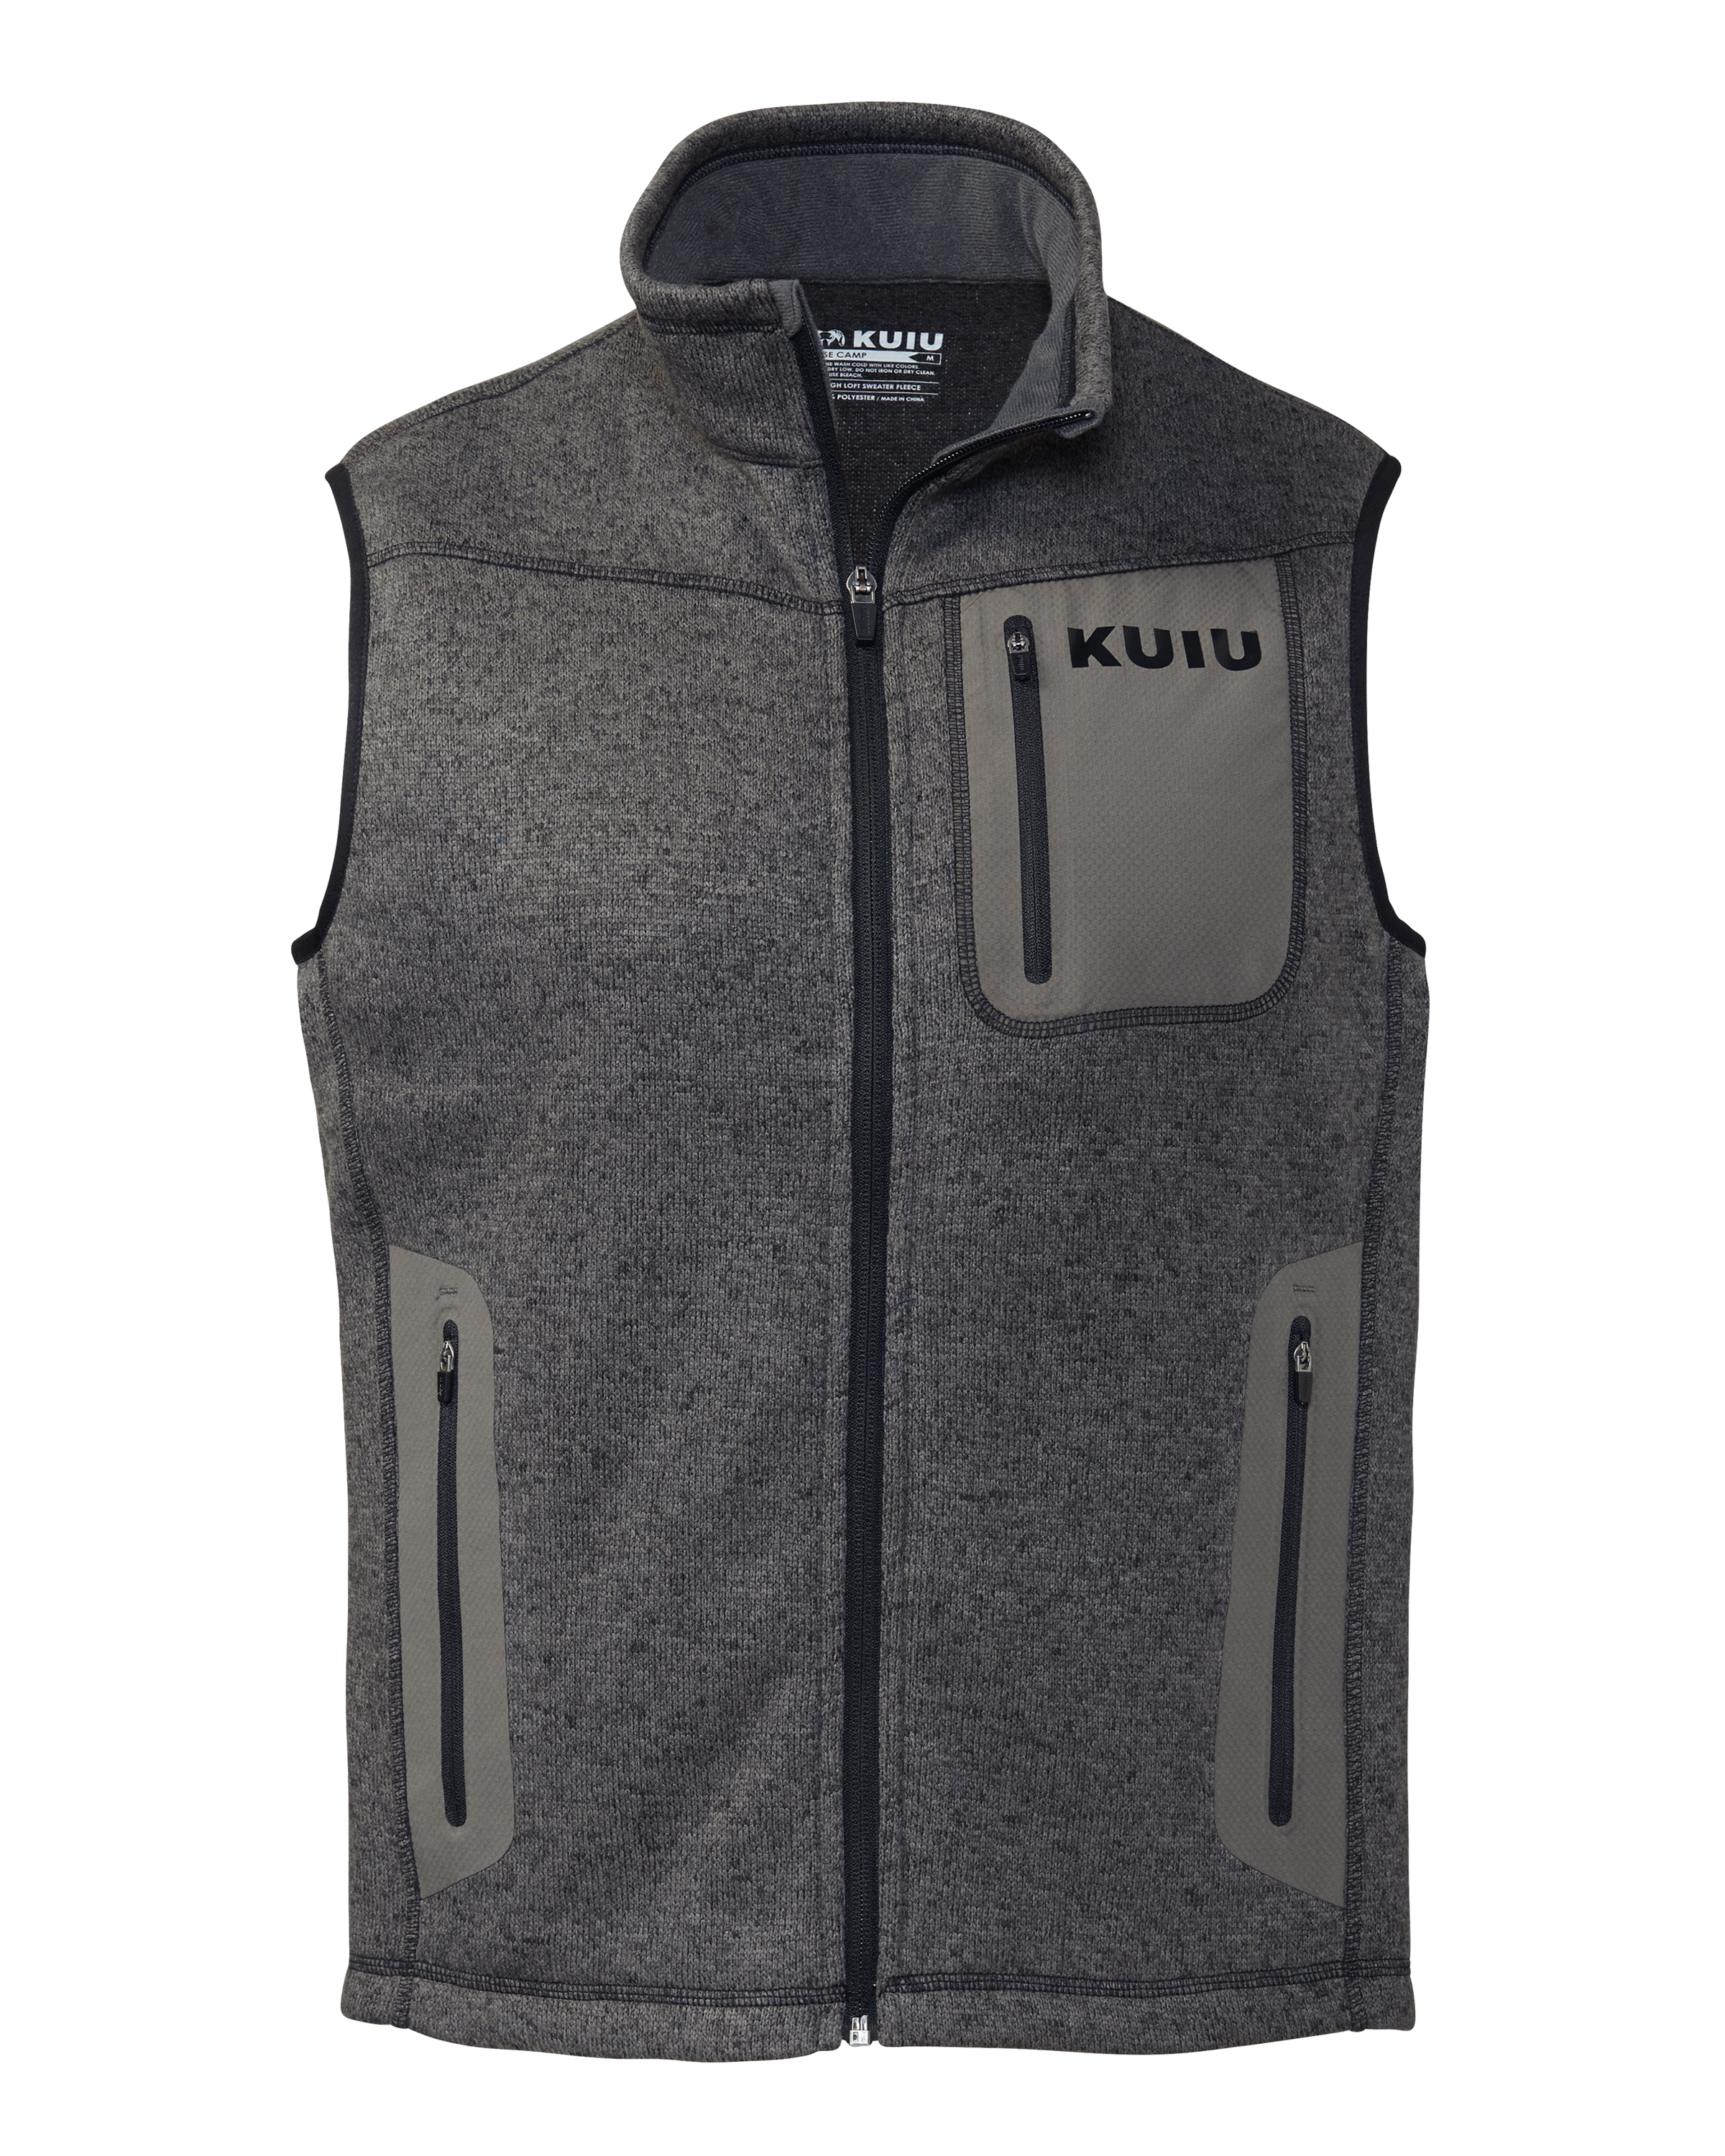 KUIU Base Camp Sweater Vest in Charcoal | Size XL